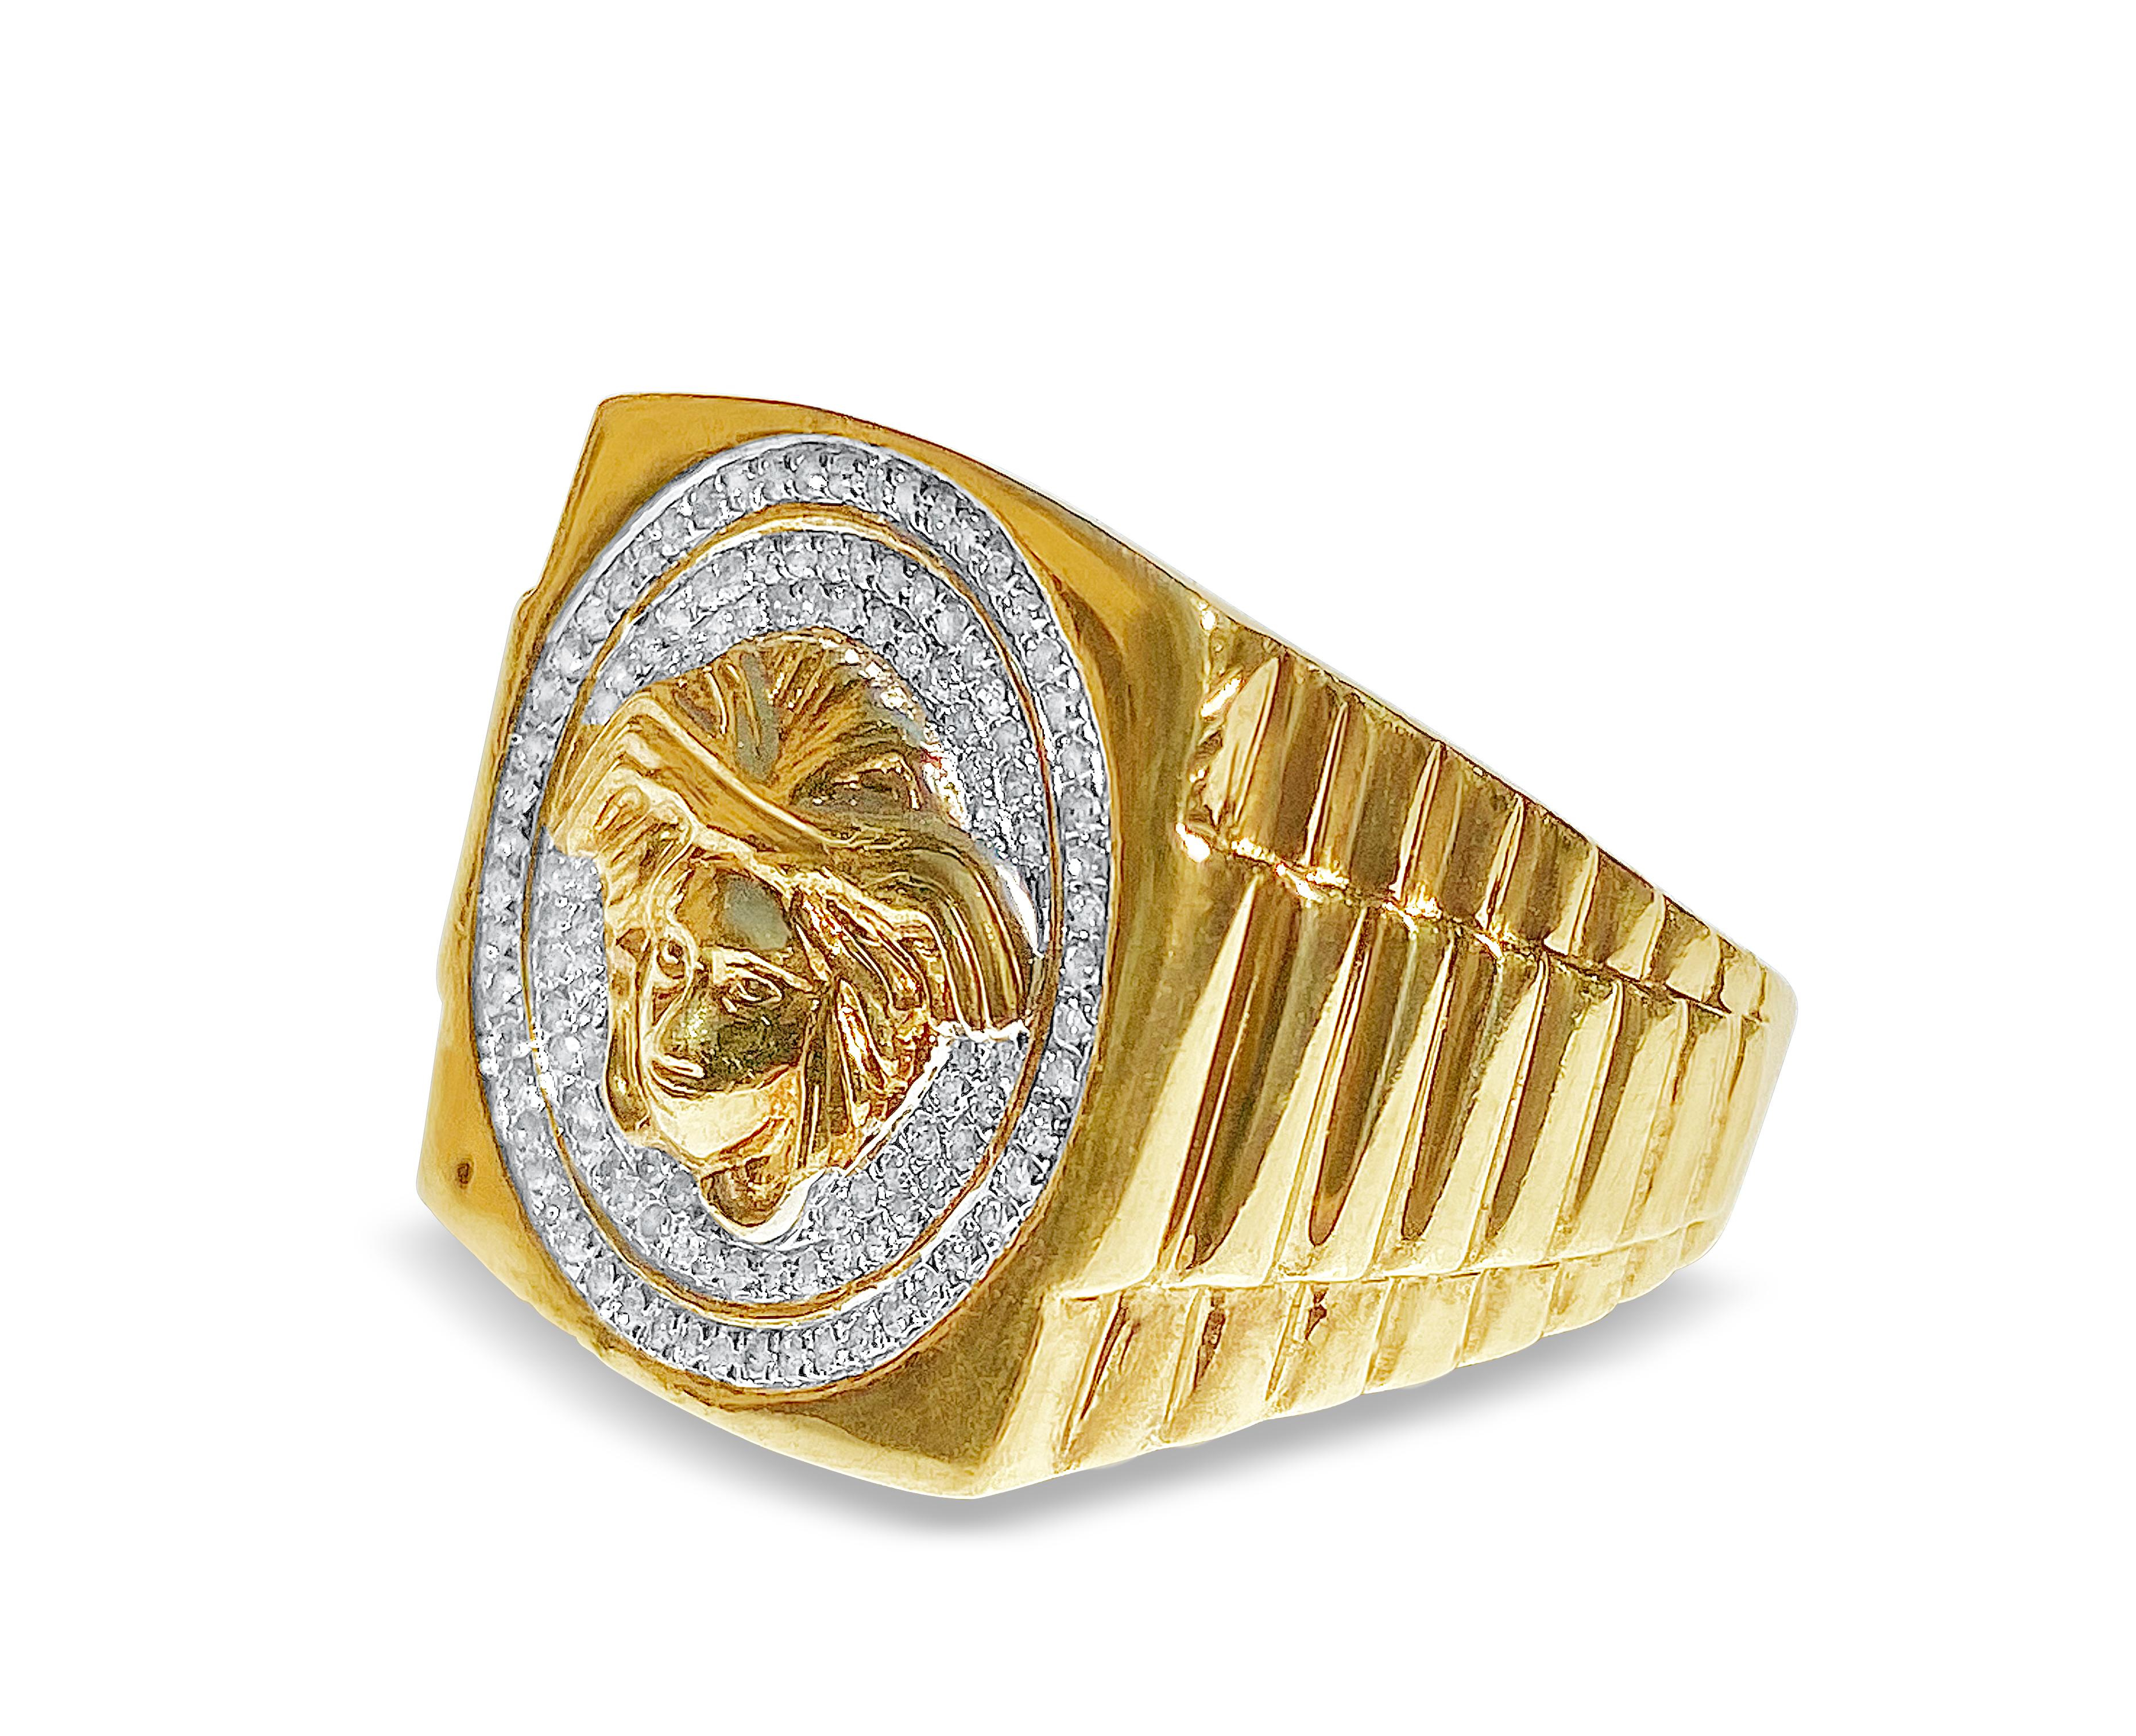 Custom made 10k solid gold mens ring with 0.40 carats in natural diamonds. Carved gold shank with gallery ring back setting for a smooth and comfortable fit. The rings face depicts a gold medusa figure, inspired by the Versace logo. 10k gold setting